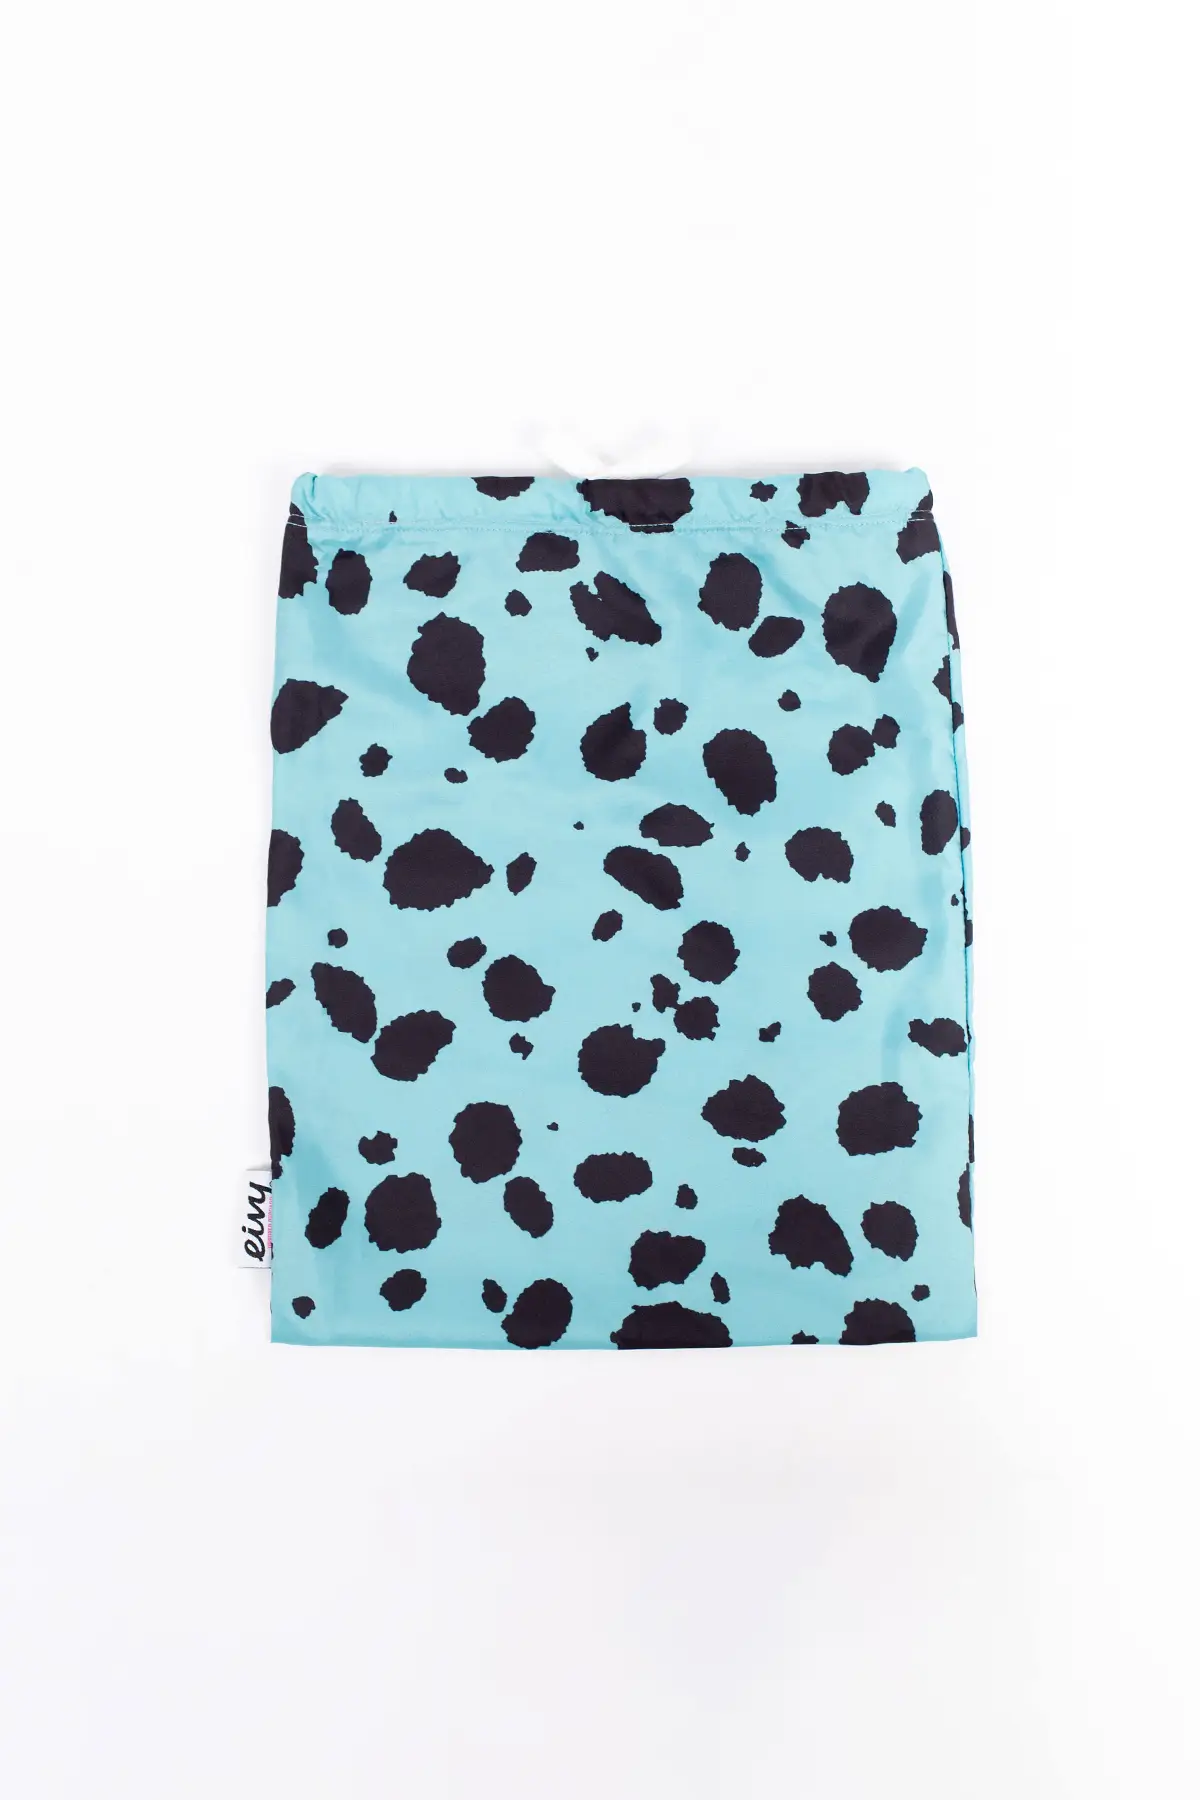 Icecold Tights - Turquoise Cheetah | XS